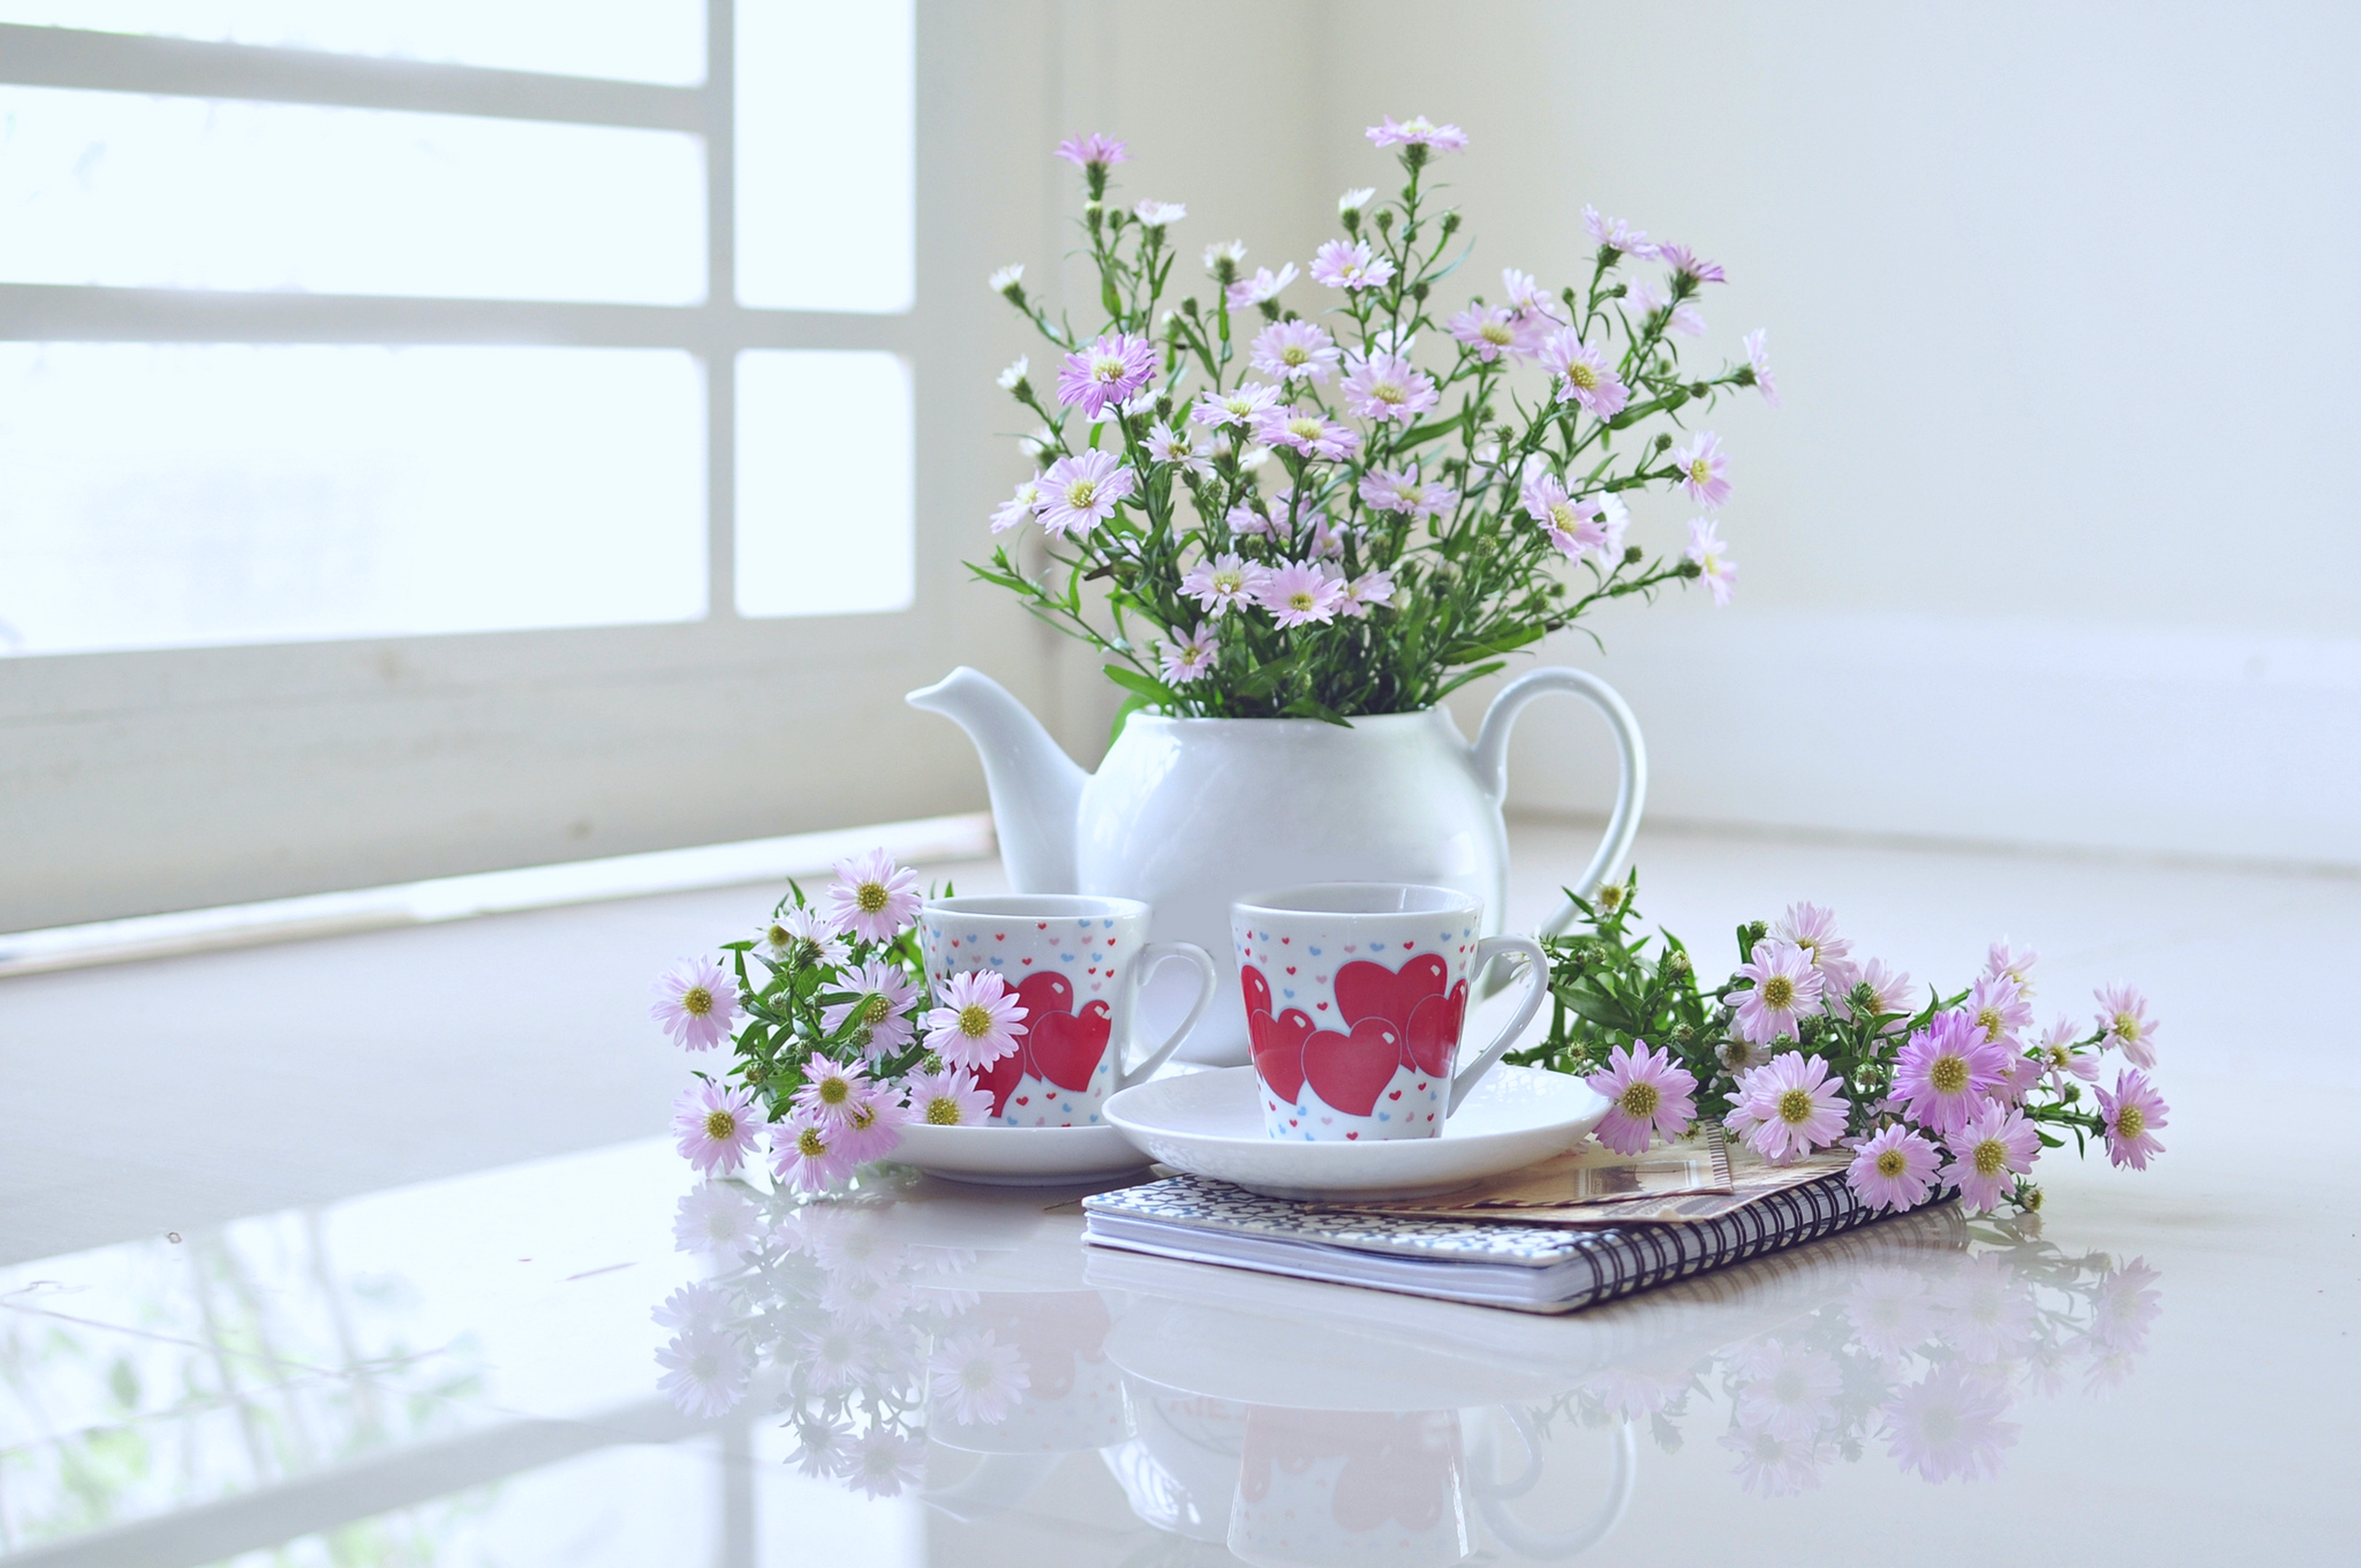 vase, photography, still life, cup, flower High Definition image